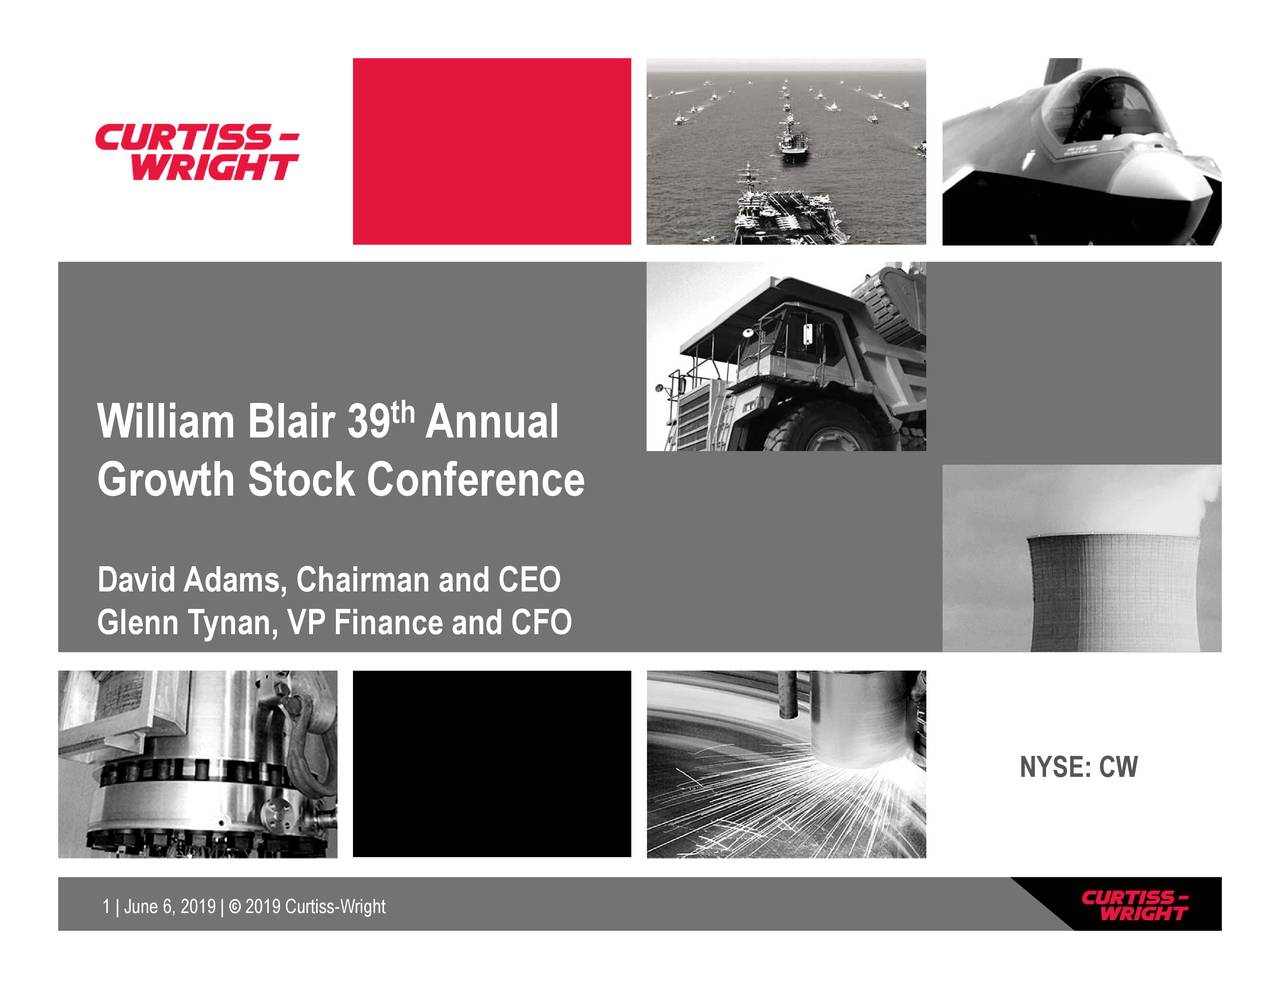 CurtissWright (CW) Presents At William Blair Growth Stock Conference